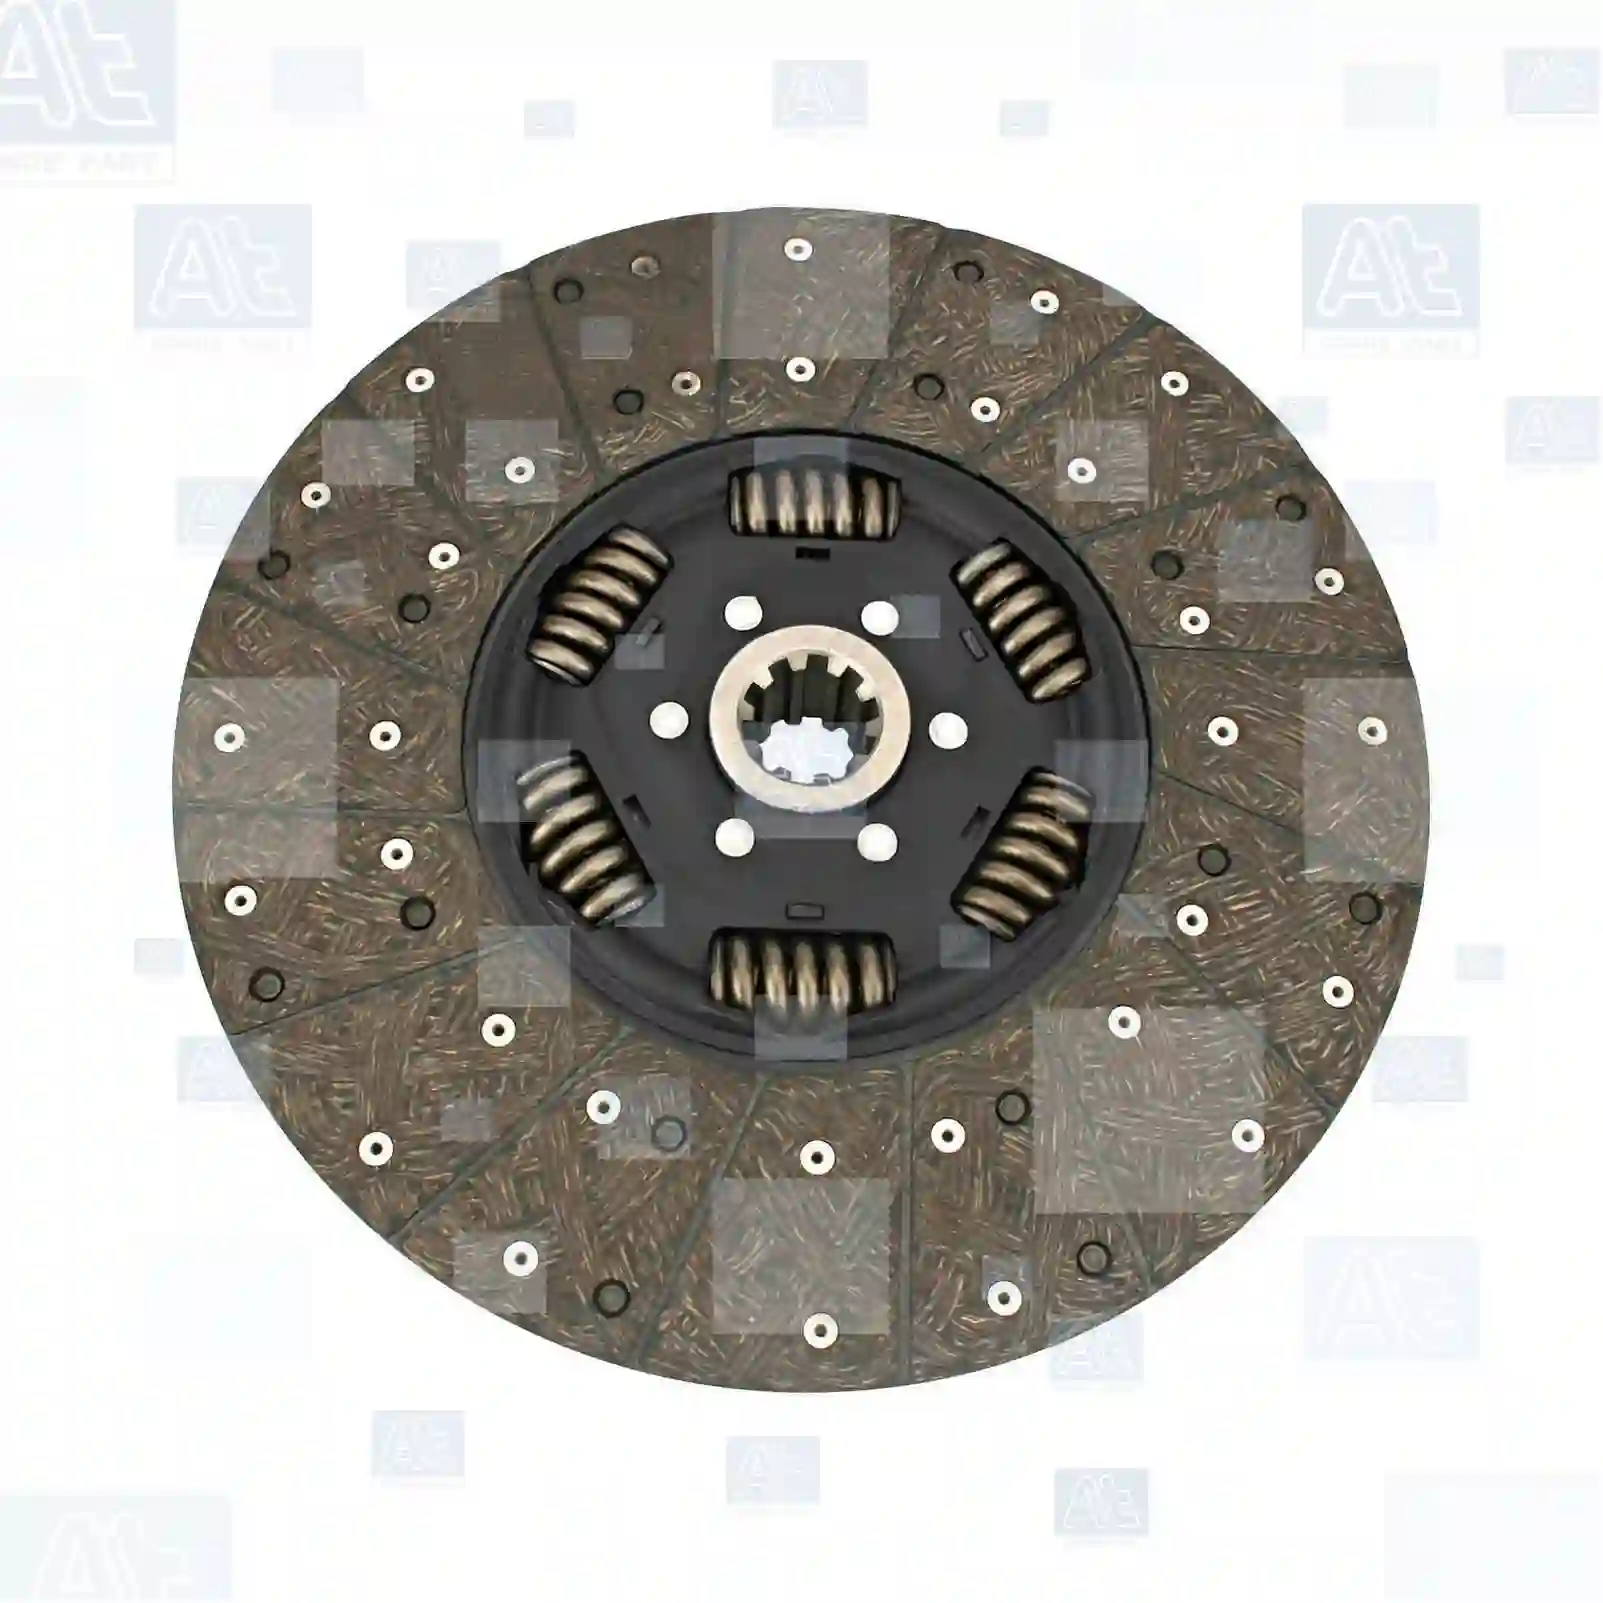 Clutch disc, at no 77721900, oem no: 54RS410141, 1400510, 1400510A, 1400510R, 1409478, ATRA242, ATRB074, 504229170, 81303010411, 81303010449, 81303010450, 81303010452, 81303010453, 81303010468, 81303010469, 81303010470, 81303010490, 81303010491, 81303010492, 81303010519, 81303010520, 81303010529, 81303010556, 81303019411, 81303019450, 81303019468, 81303019492, 81303019520, 81303019529, 81303019556, 30100-LA400 At Spare Part | Engine, Accelerator Pedal, Camshaft, Connecting Rod, Crankcase, Crankshaft, Cylinder Head, Engine Suspension Mountings, Exhaust Manifold, Exhaust Gas Recirculation, Filter Kits, Flywheel Housing, General Overhaul Kits, Engine, Intake Manifold, Oil Cleaner, Oil Cooler, Oil Filter, Oil Pump, Oil Sump, Piston & Liner, Sensor & Switch, Timing Case, Turbocharger, Cooling System, Belt Tensioner, Coolant Filter, Coolant Pipe, Corrosion Prevention Agent, Drive, Expansion Tank, Fan, Intercooler, Monitors & Gauges, Radiator, Thermostat, V-Belt / Timing belt, Water Pump, Fuel System, Electronical Injector Unit, Feed Pump, Fuel Filter, cpl., Fuel Gauge Sender,  Fuel Line, Fuel Pump, Fuel Tank, Injection Line Kit, Injection Pump, Exhaust System, Clutch & Pedal, Gearbox, Propeller Shaft, Axles, Brake System, Hubs & Wheels, Suspension, Leaf Spring, Universal Parts / Accessories, Steering, Electrical System, Cabin Clutch disc, at no 77721900, oem no: 54RS410141, 1400510, 1400510A, 1400510R, 1409478, ATRA242, ATRB074, 504229170, 81303010411, 81303010449, 81303010450, 81303010452, 81303010453, 81303010468, 81303010469, 81303010470, 81303010490, 81303010491, 81303010492, 81303010519, 81303010520, 81303010529, 81303010556, 81303019411, 81303019450, 81303019468, 81303019492, 81303019520, 81303019529, 81303019556, 30100-LA400 At Spare Part | Engine, Accelerator Pedal, Camshaft, Connecting Rod, Crankcase, Crankshaft, Cylinder Head, Engine Suspension Mountings, Exhaust Manifold, Exhaust Gas Recirculation, Filter Kits, Flywheel Housing, General Overhaul Kits, Engine, Intake Manifold, Oil Cleaner, Oil Cooler, Oil Filter, Oil Pump, Oil Sump, Piston & Liner, Sensor & Switch, Timing Case, Turbocharger, Cooling System, Belt Tensioner, Coolant Filter, Coolant Pipe, Corrosion Prevention Agent, Drive, Expansion Tank, Fan, Intercooler, Monitors & Gauges, Radiator, Thermostat, V-Belt / Timing belt, Water Pump, Fuel System, Electronical Injector Unit, Feed Pump, Fuel Filter, cpl., Fuel Gauge Sender,  Fuel Line, Fuel Pump, Fuel Tank, Injection Line Kit, Injection Pump, Exhaust System, Clutch & Pedal, Gearbox, Propeller Shaft, Axles, Brake System, Hubs & Wheels, Suspension, Leaf Spring, Universal Parts / Accessories, Steering, Electrical System, Cabin